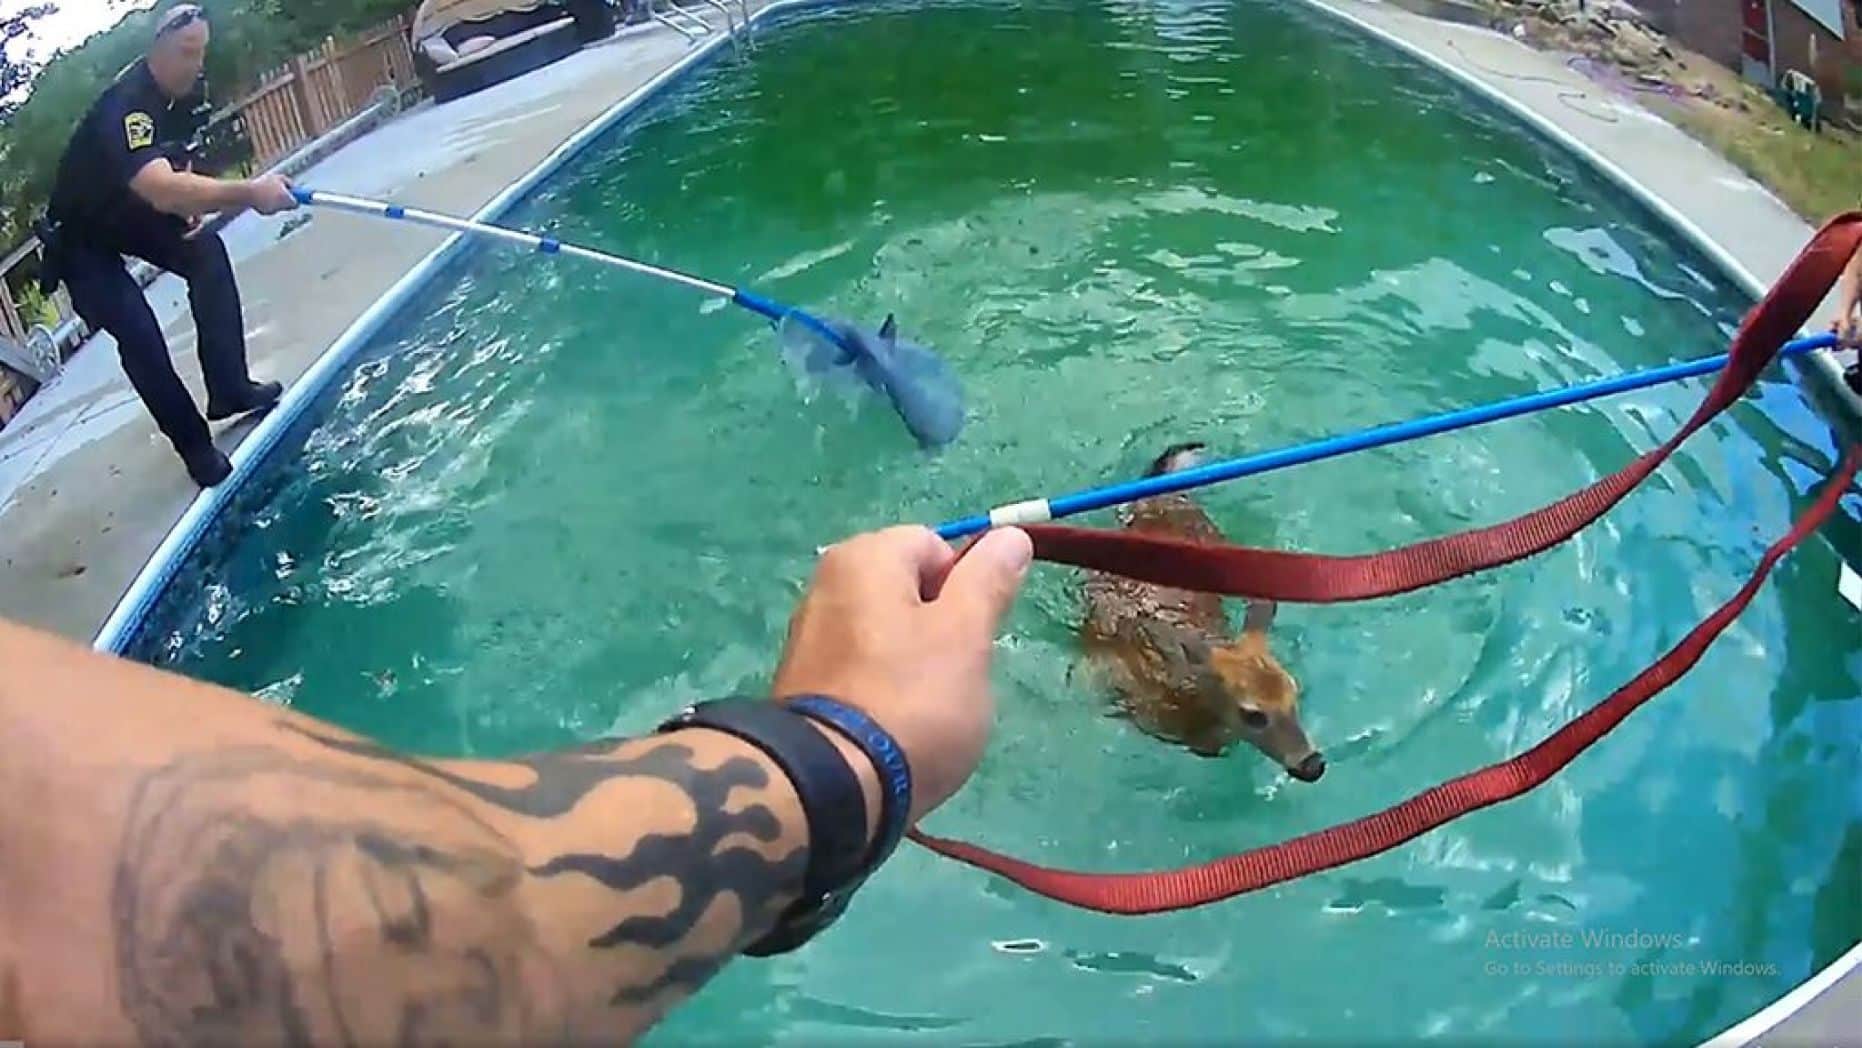 Body camera video the police department shared on Facebook shows how officers were able to wrangle the animals using nets and pull them from the water. (City of Parma PD)